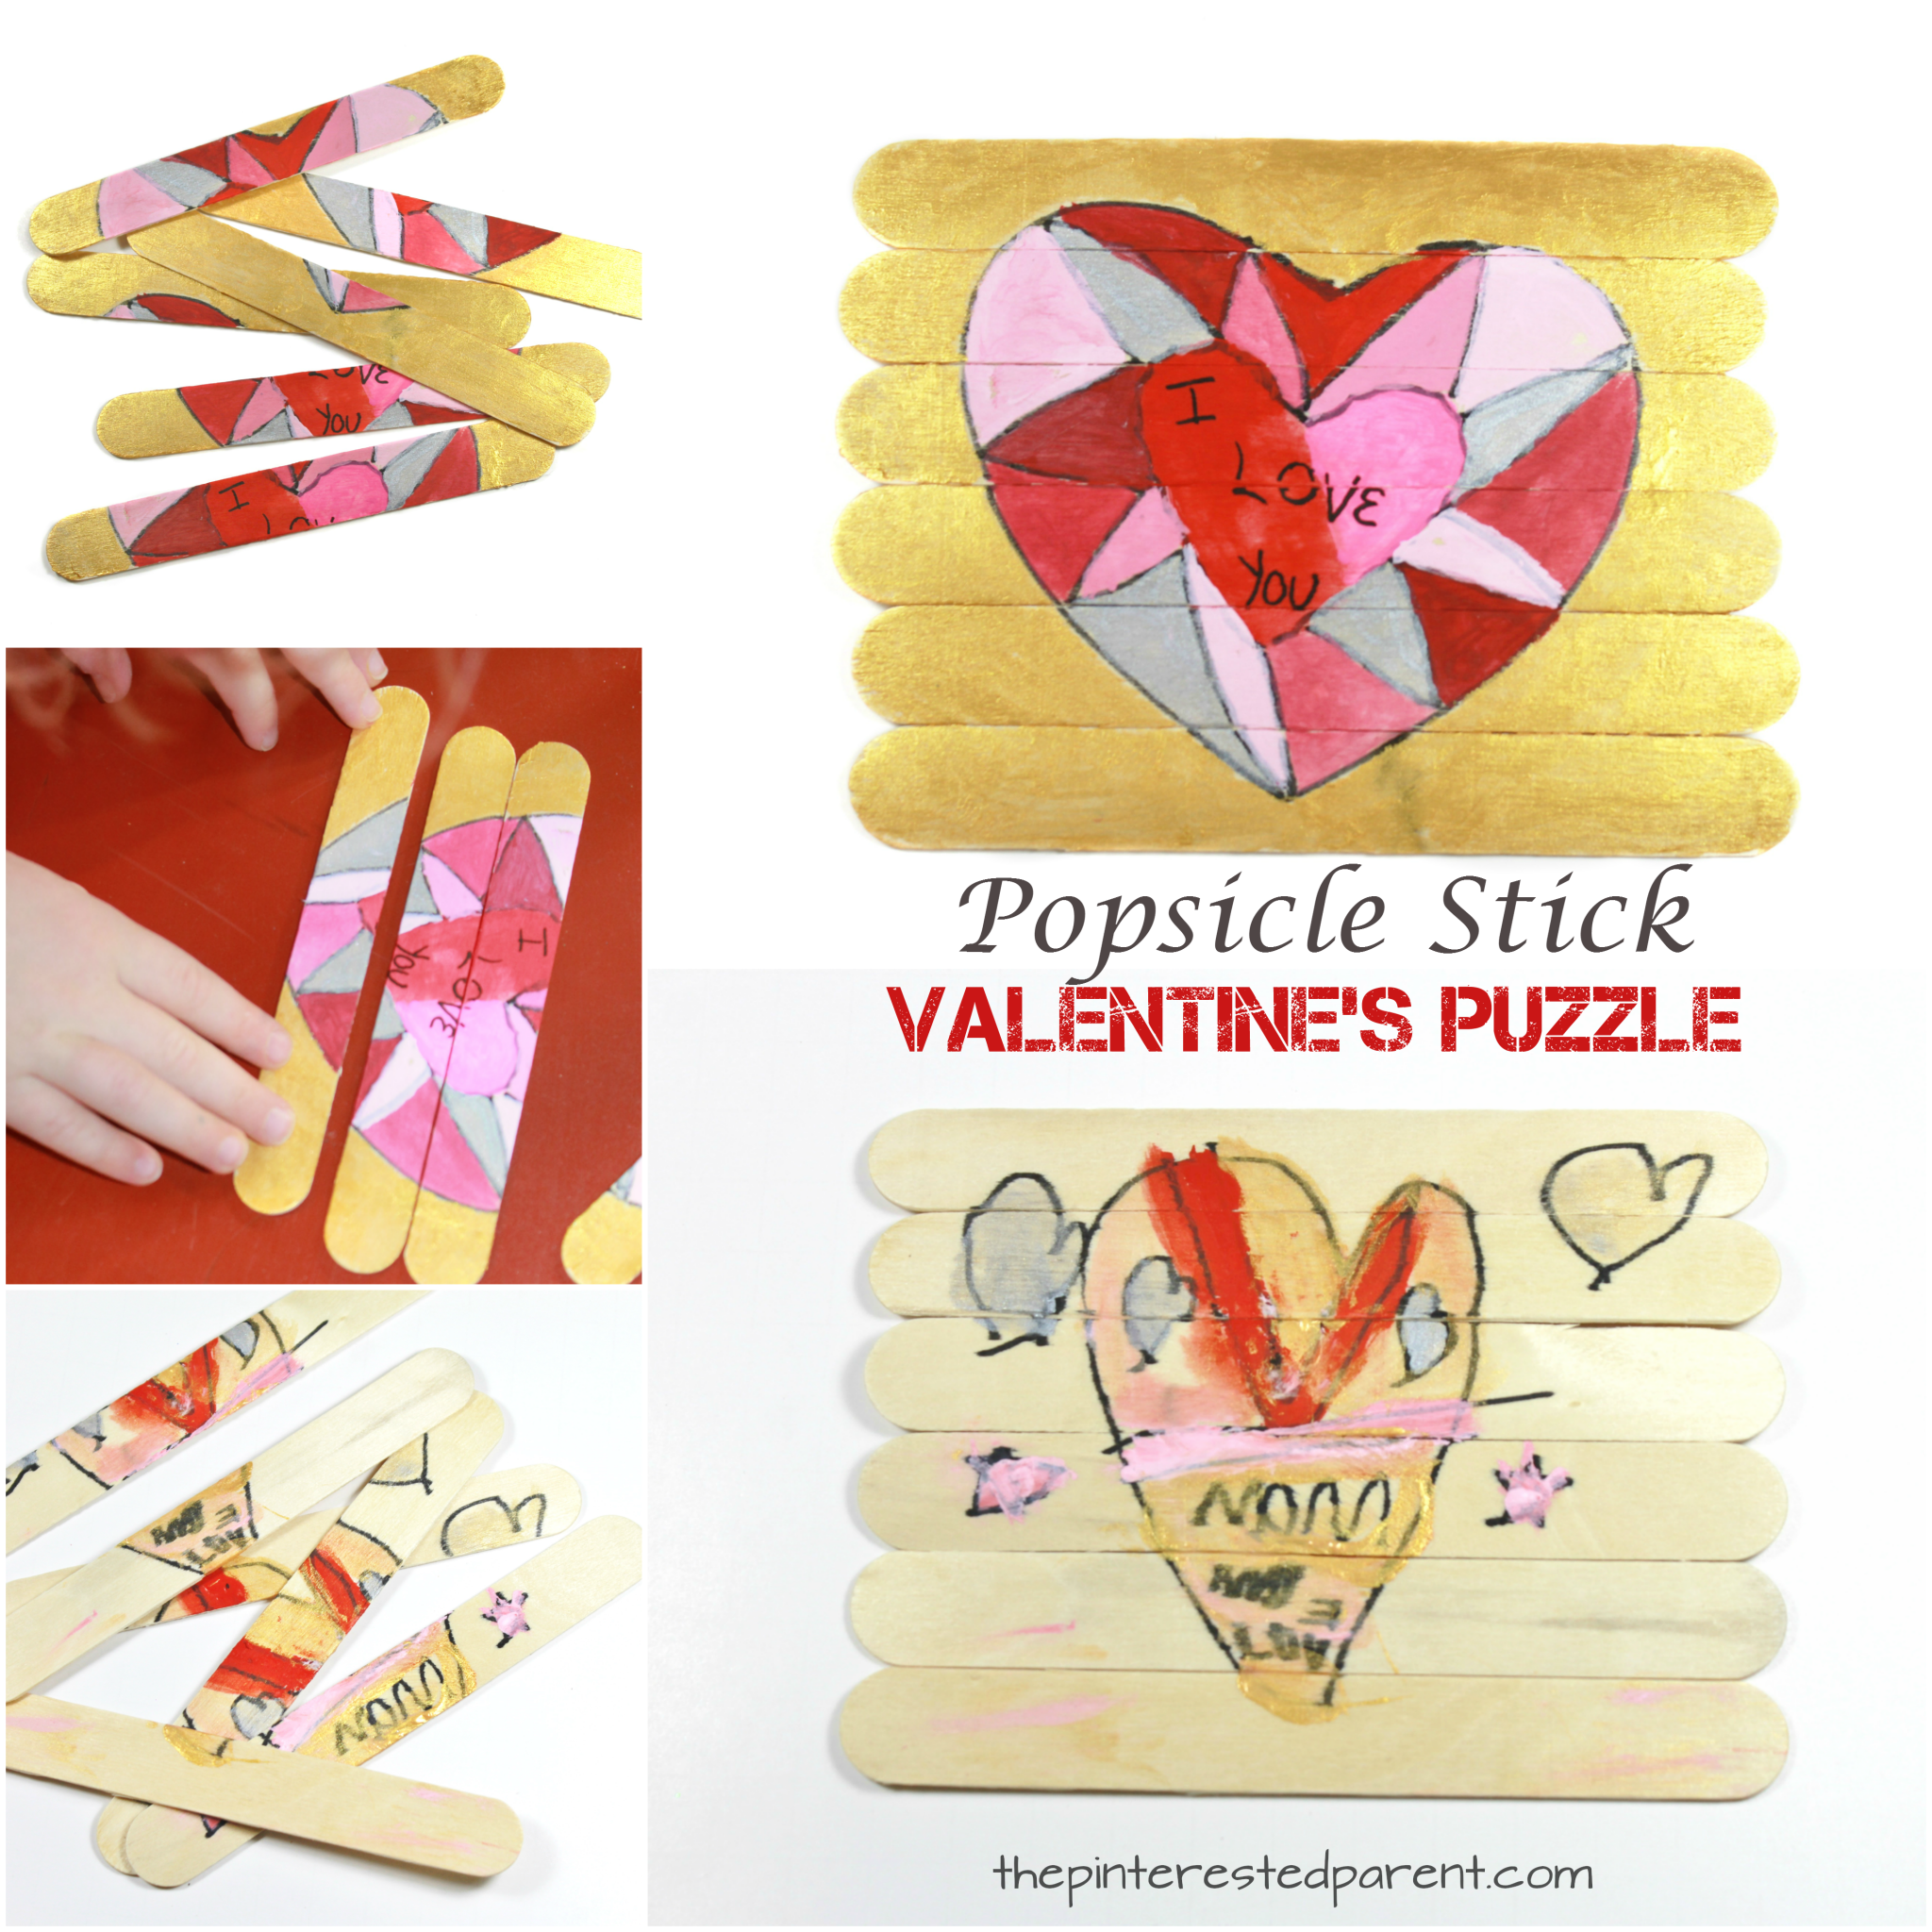 Make a sweet message for mom, dad or grandma and grandpa. Popsicle stick Valentine's heart puzzle. Arts & crafts for kids and preschoolers. Cute gift idea.